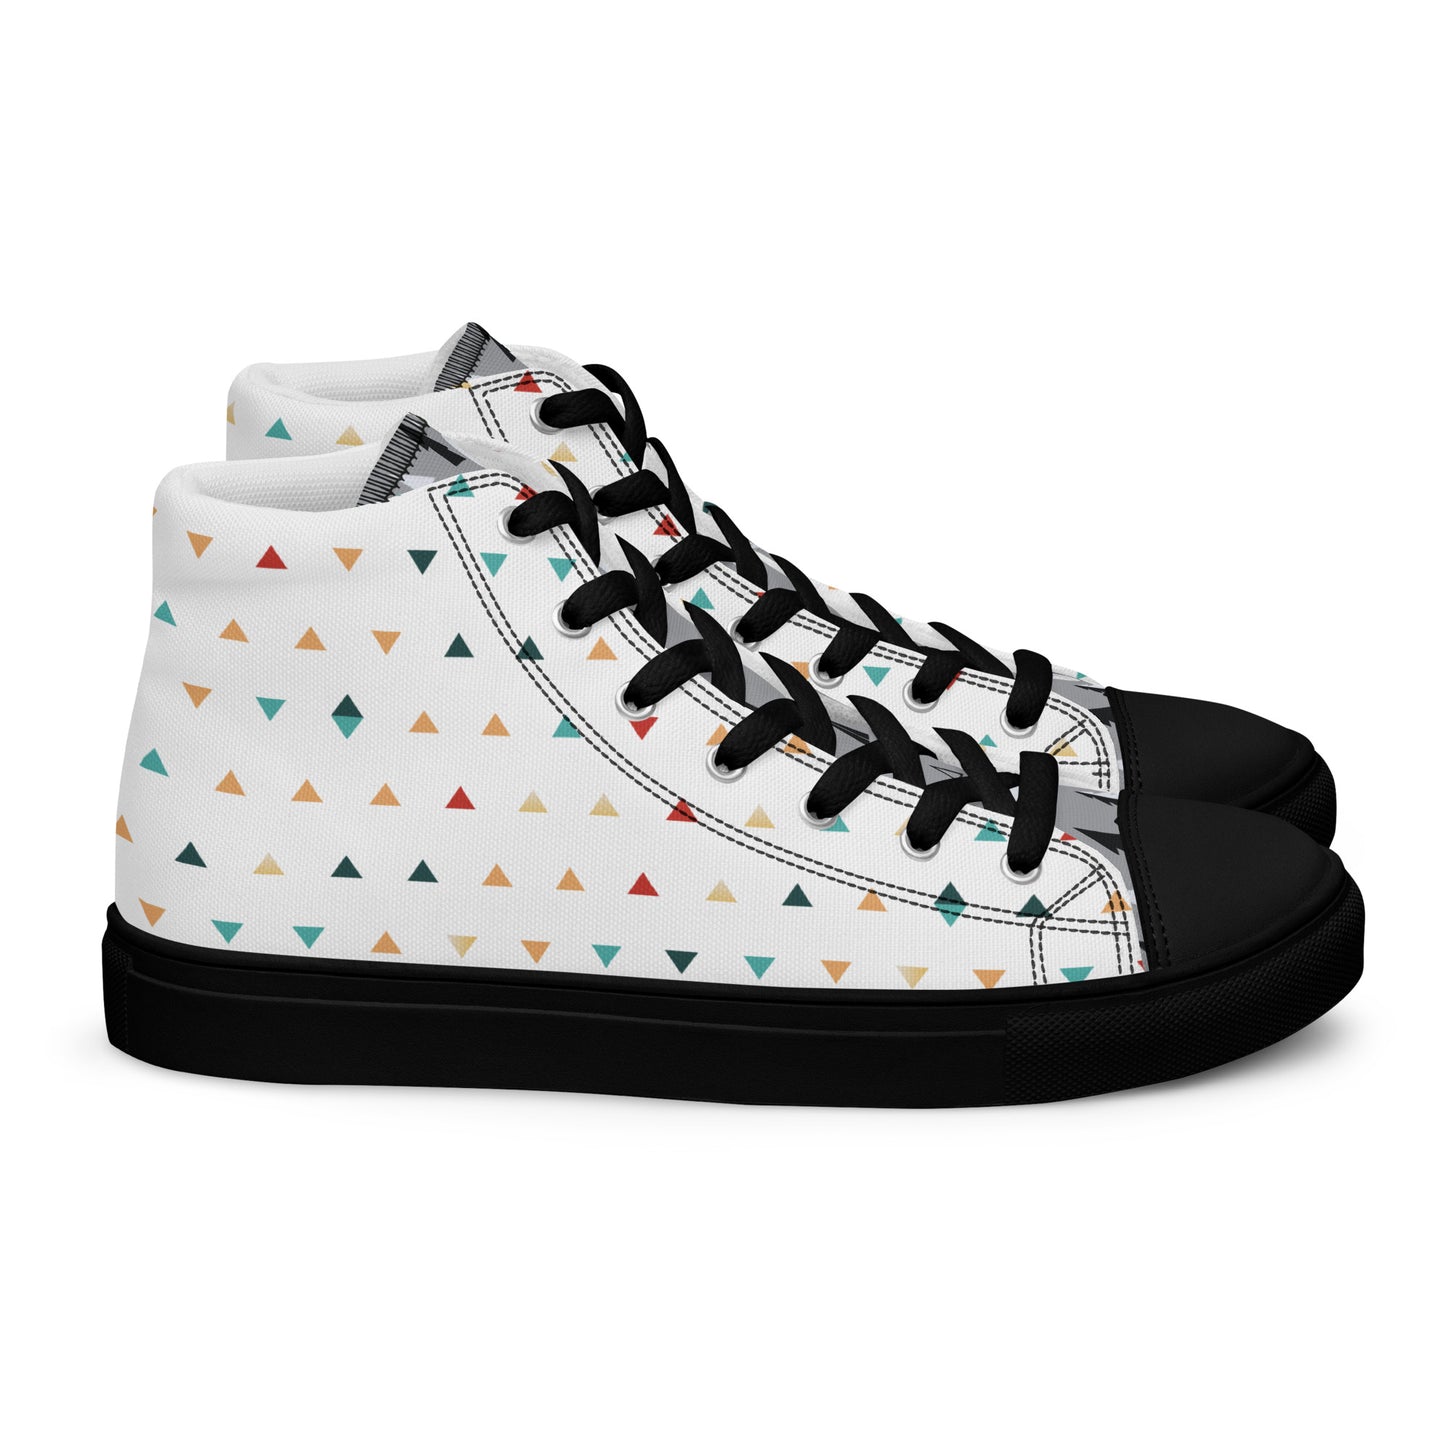 High-top canvas shoes for men